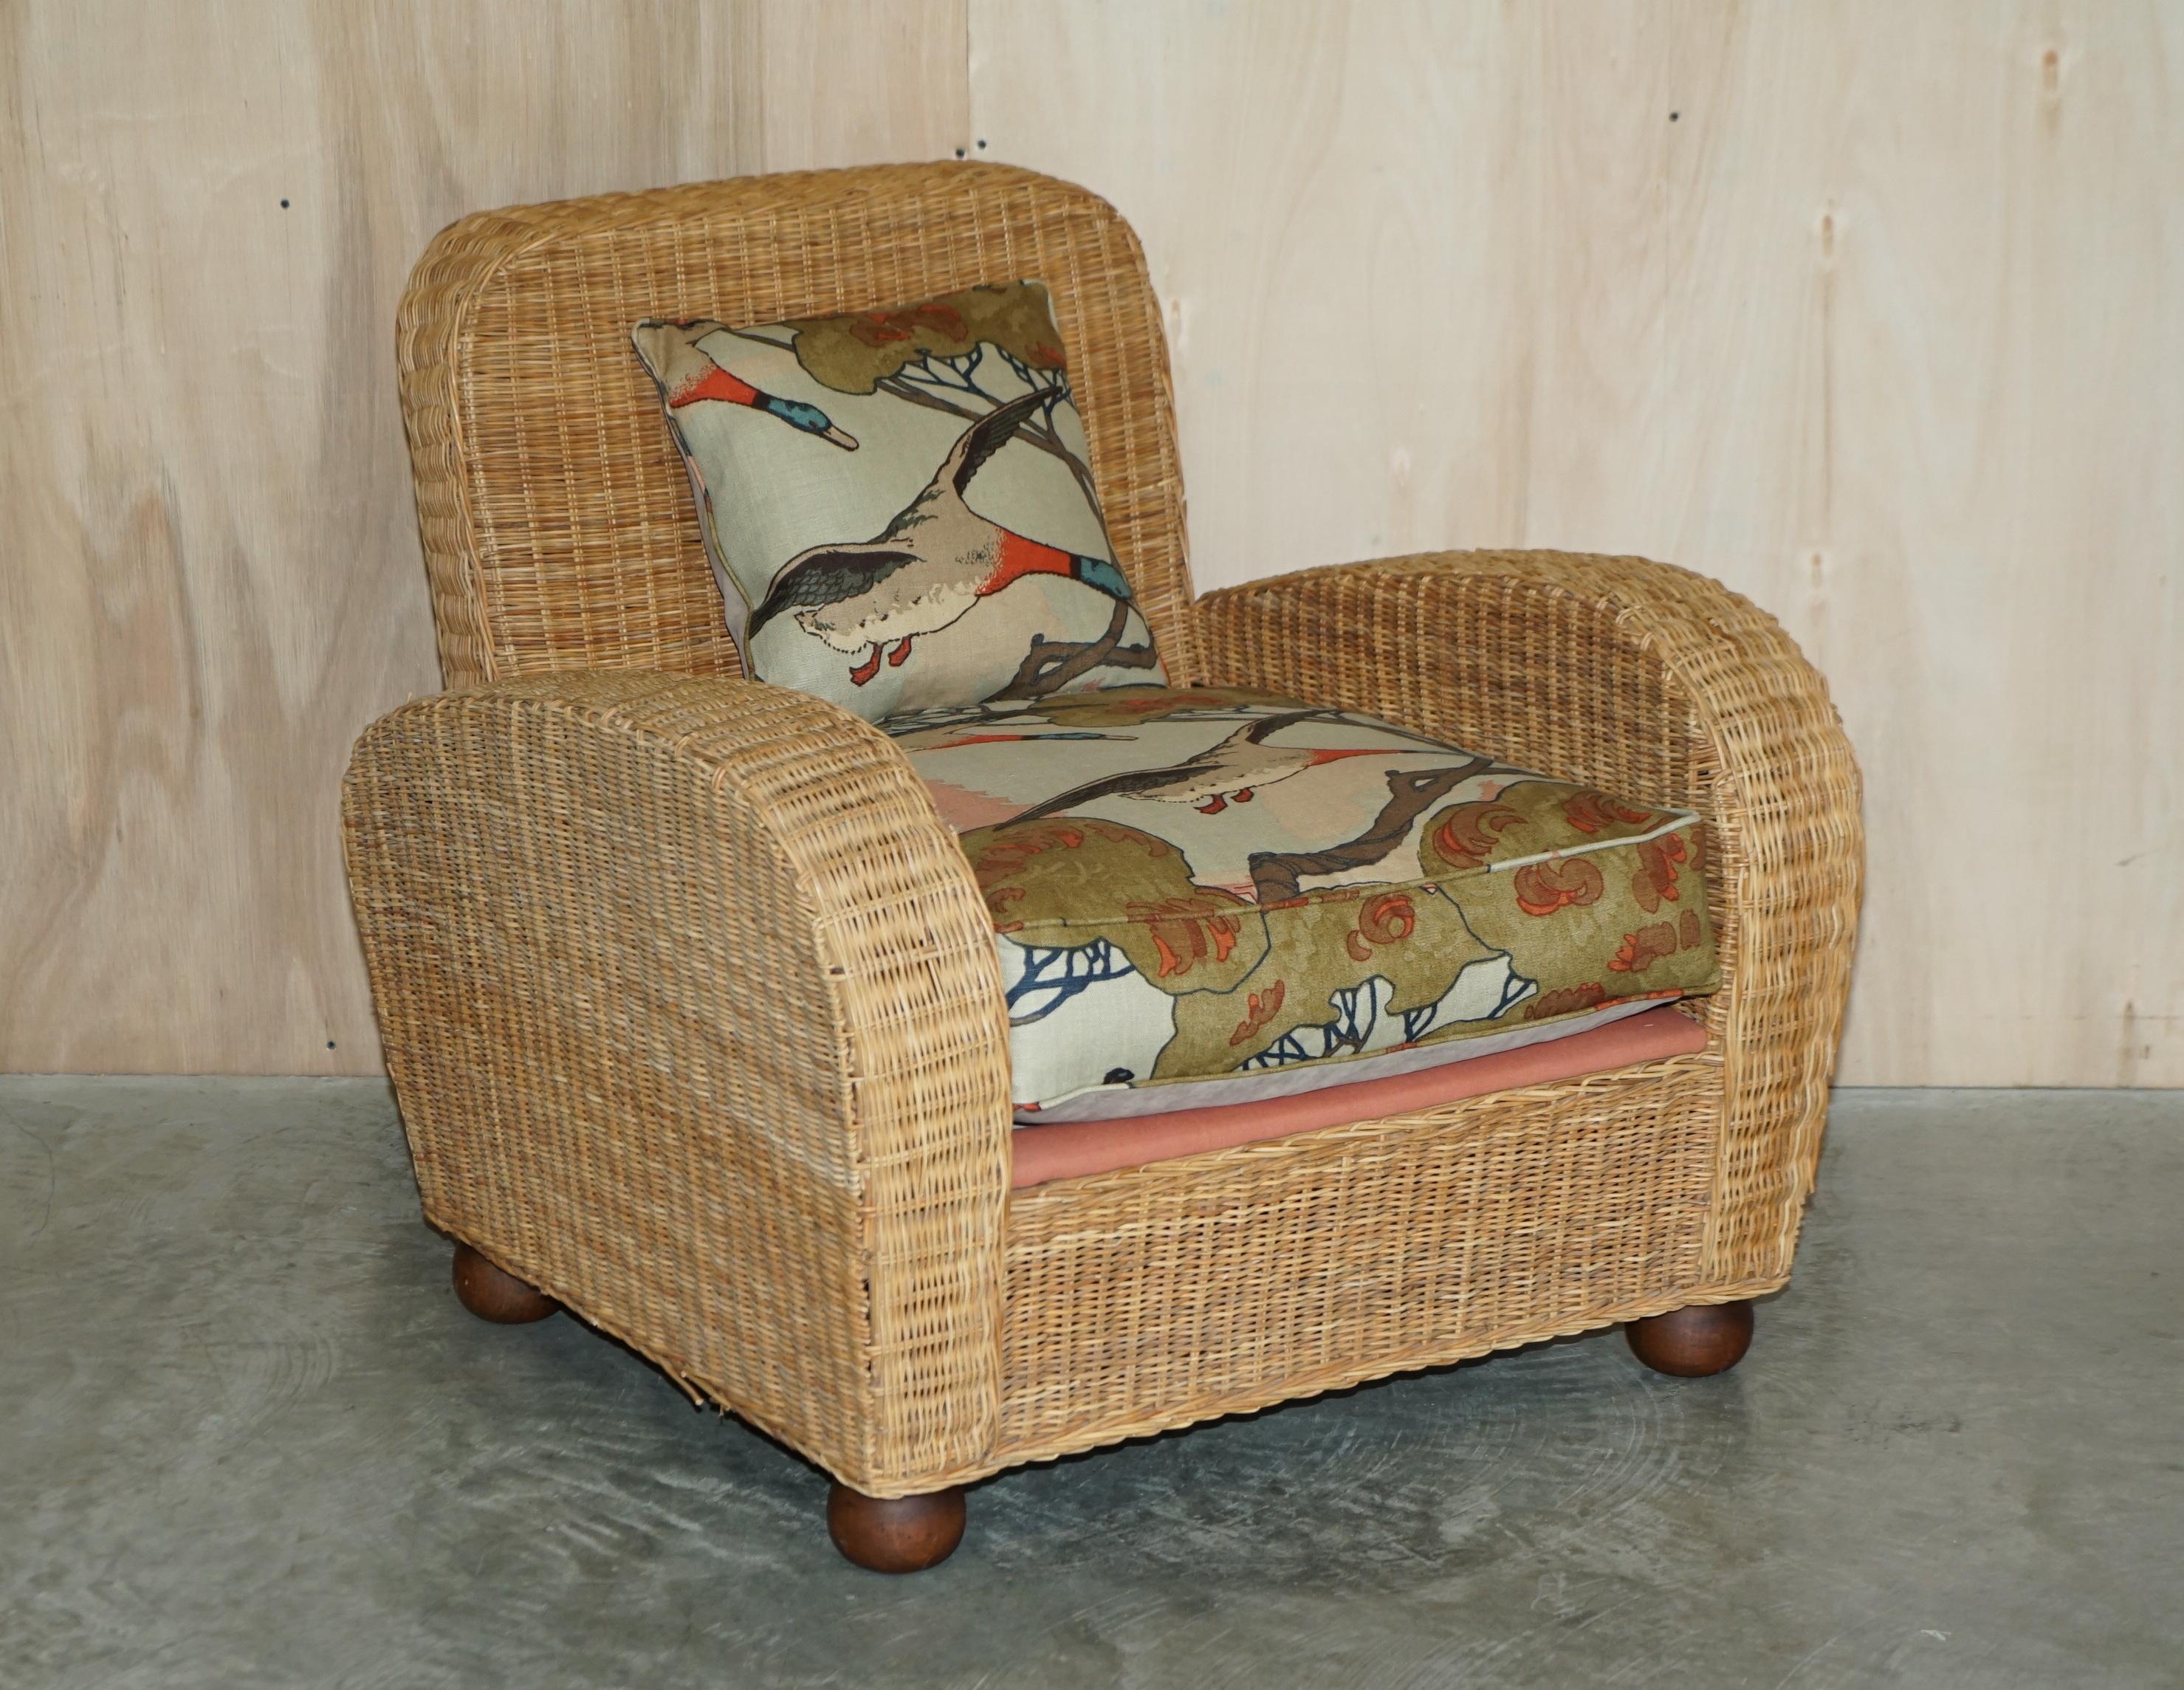 Royal House Antiques

Royal House Antiques is delighted to offer for sale this stunning pair of vintage Art Deco style wicker armchairs upholstered in Mulberry linen Flying Ducks fabric

Please note the delivery fee listed is just a guide, it covers